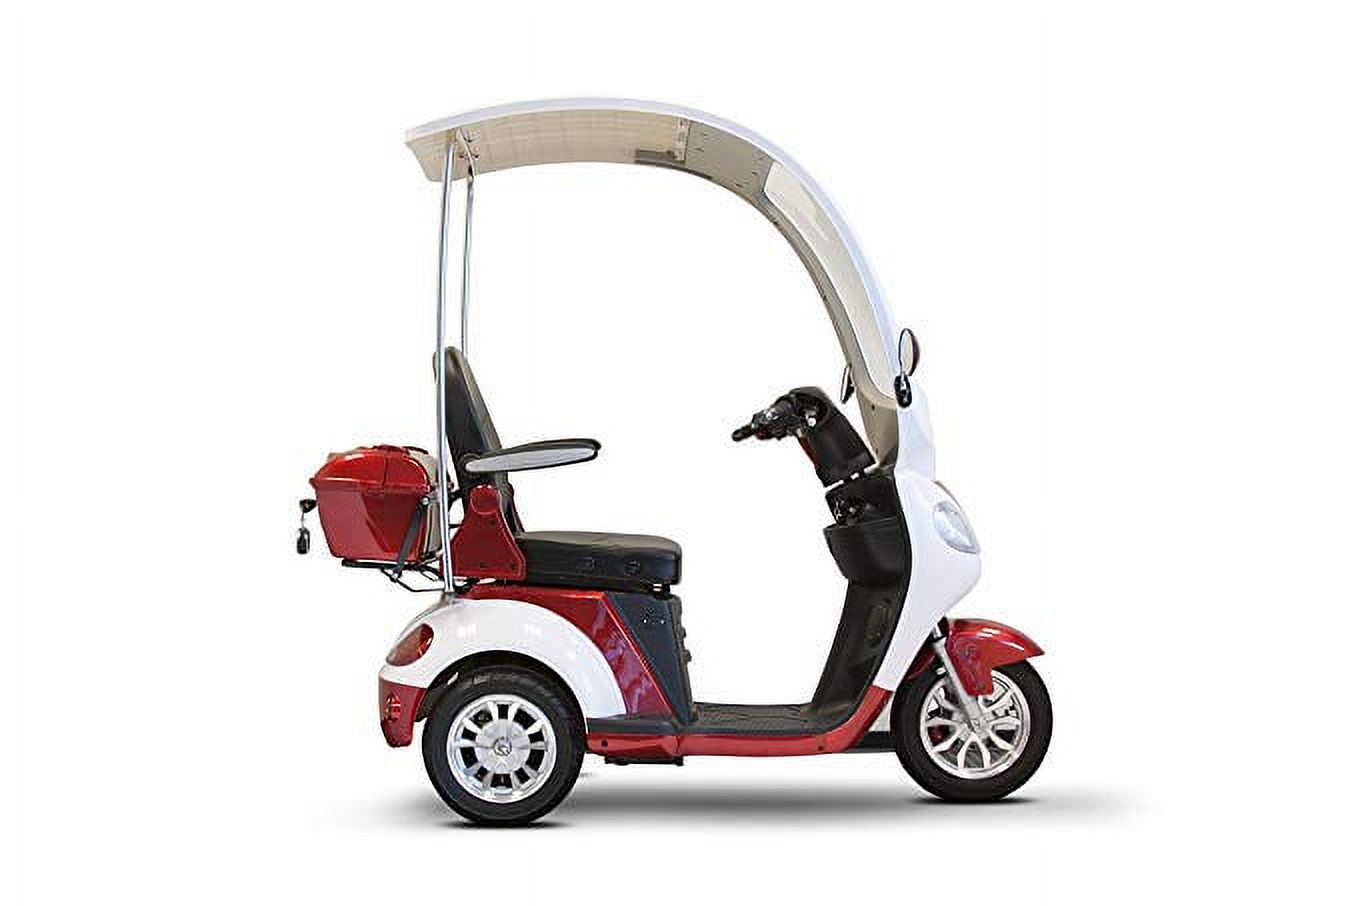 Ewheels Ewheels Luxurious Electric Oversized Scooter with Full Canopy Red - image 2 of 3